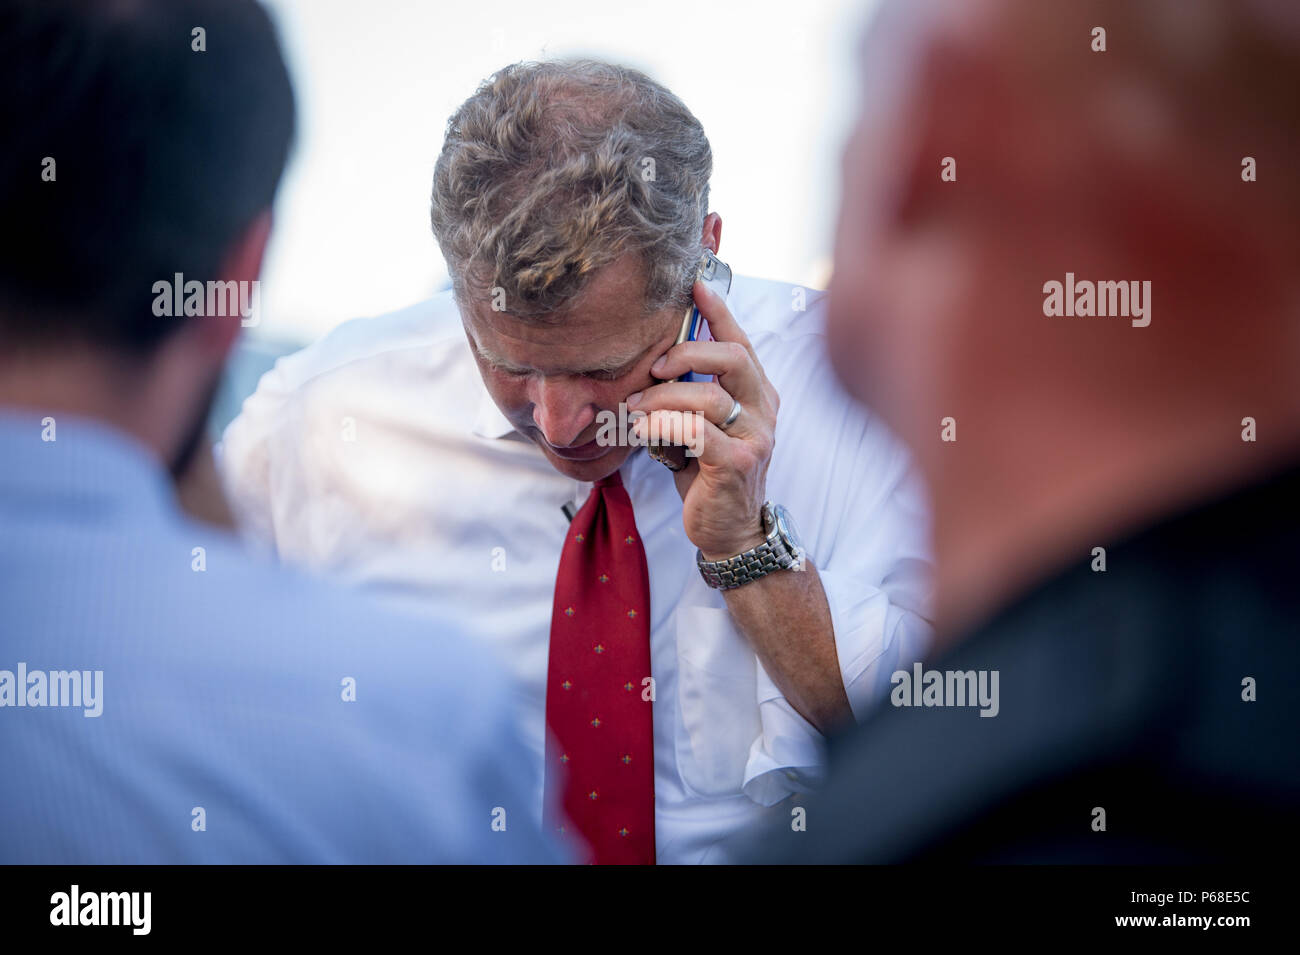 Annapolis, Maryland, USA. 28th June, 2018. June 28, 2018, Annapolis Maryland - Anne Arundel County Executive Steve Schuh speaks to Congressman Chris Van Hollen by phone on the scene of an active shooter incident at the offices for the Capital Gazette newspaper. Credit: Michael Jordan/ZUMA Wire/Alamy Live News Stock Photo